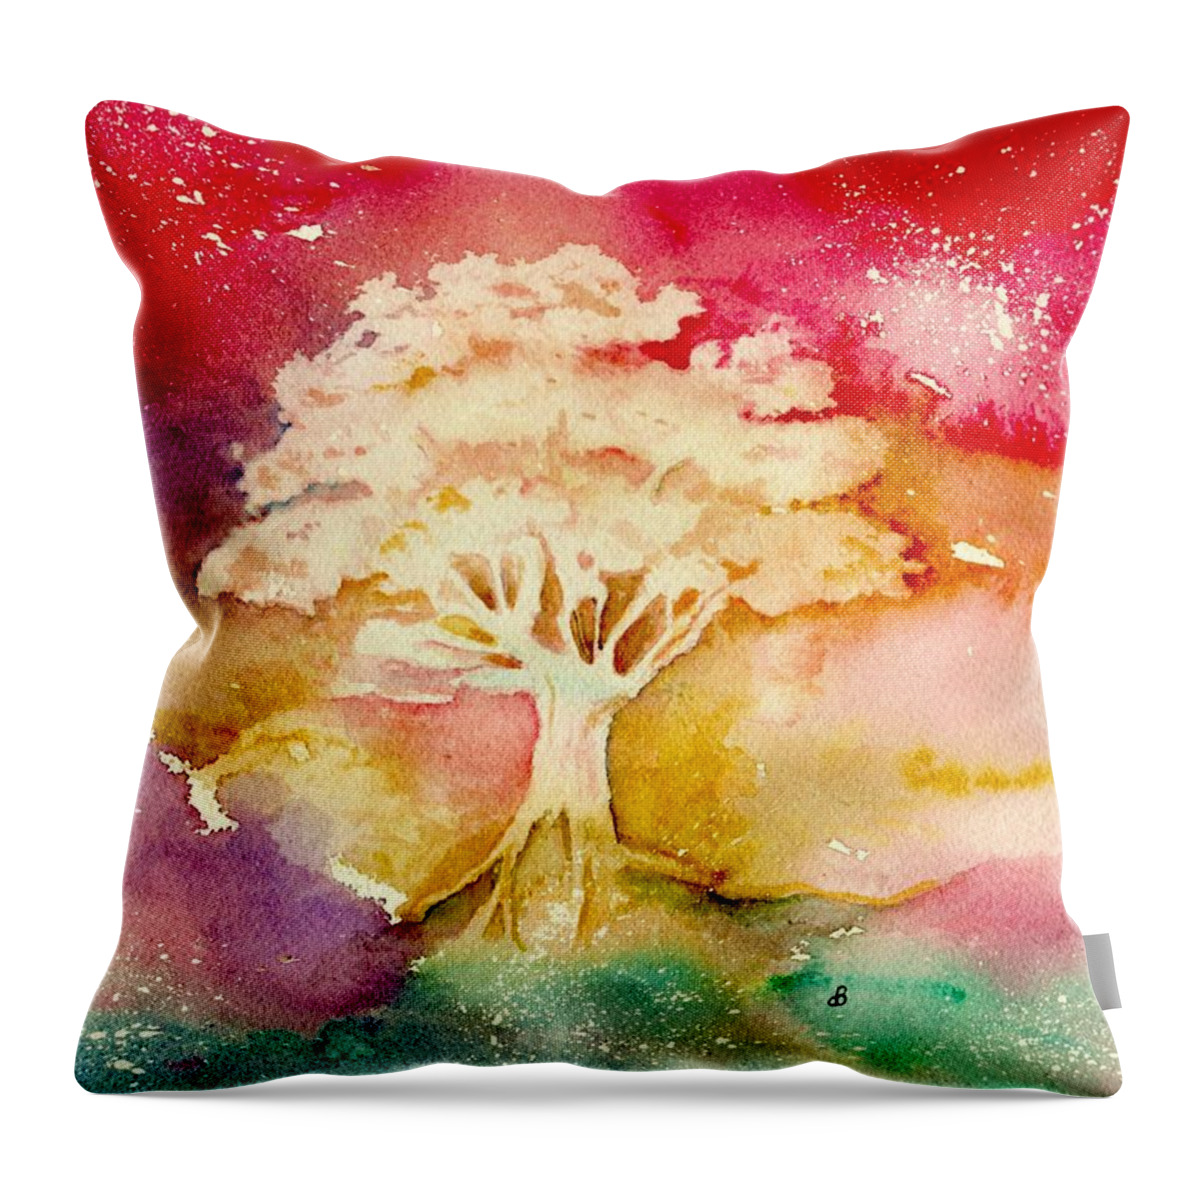 Watercolor Throw Pillow featuring the painting Red Night by Brenda Owen